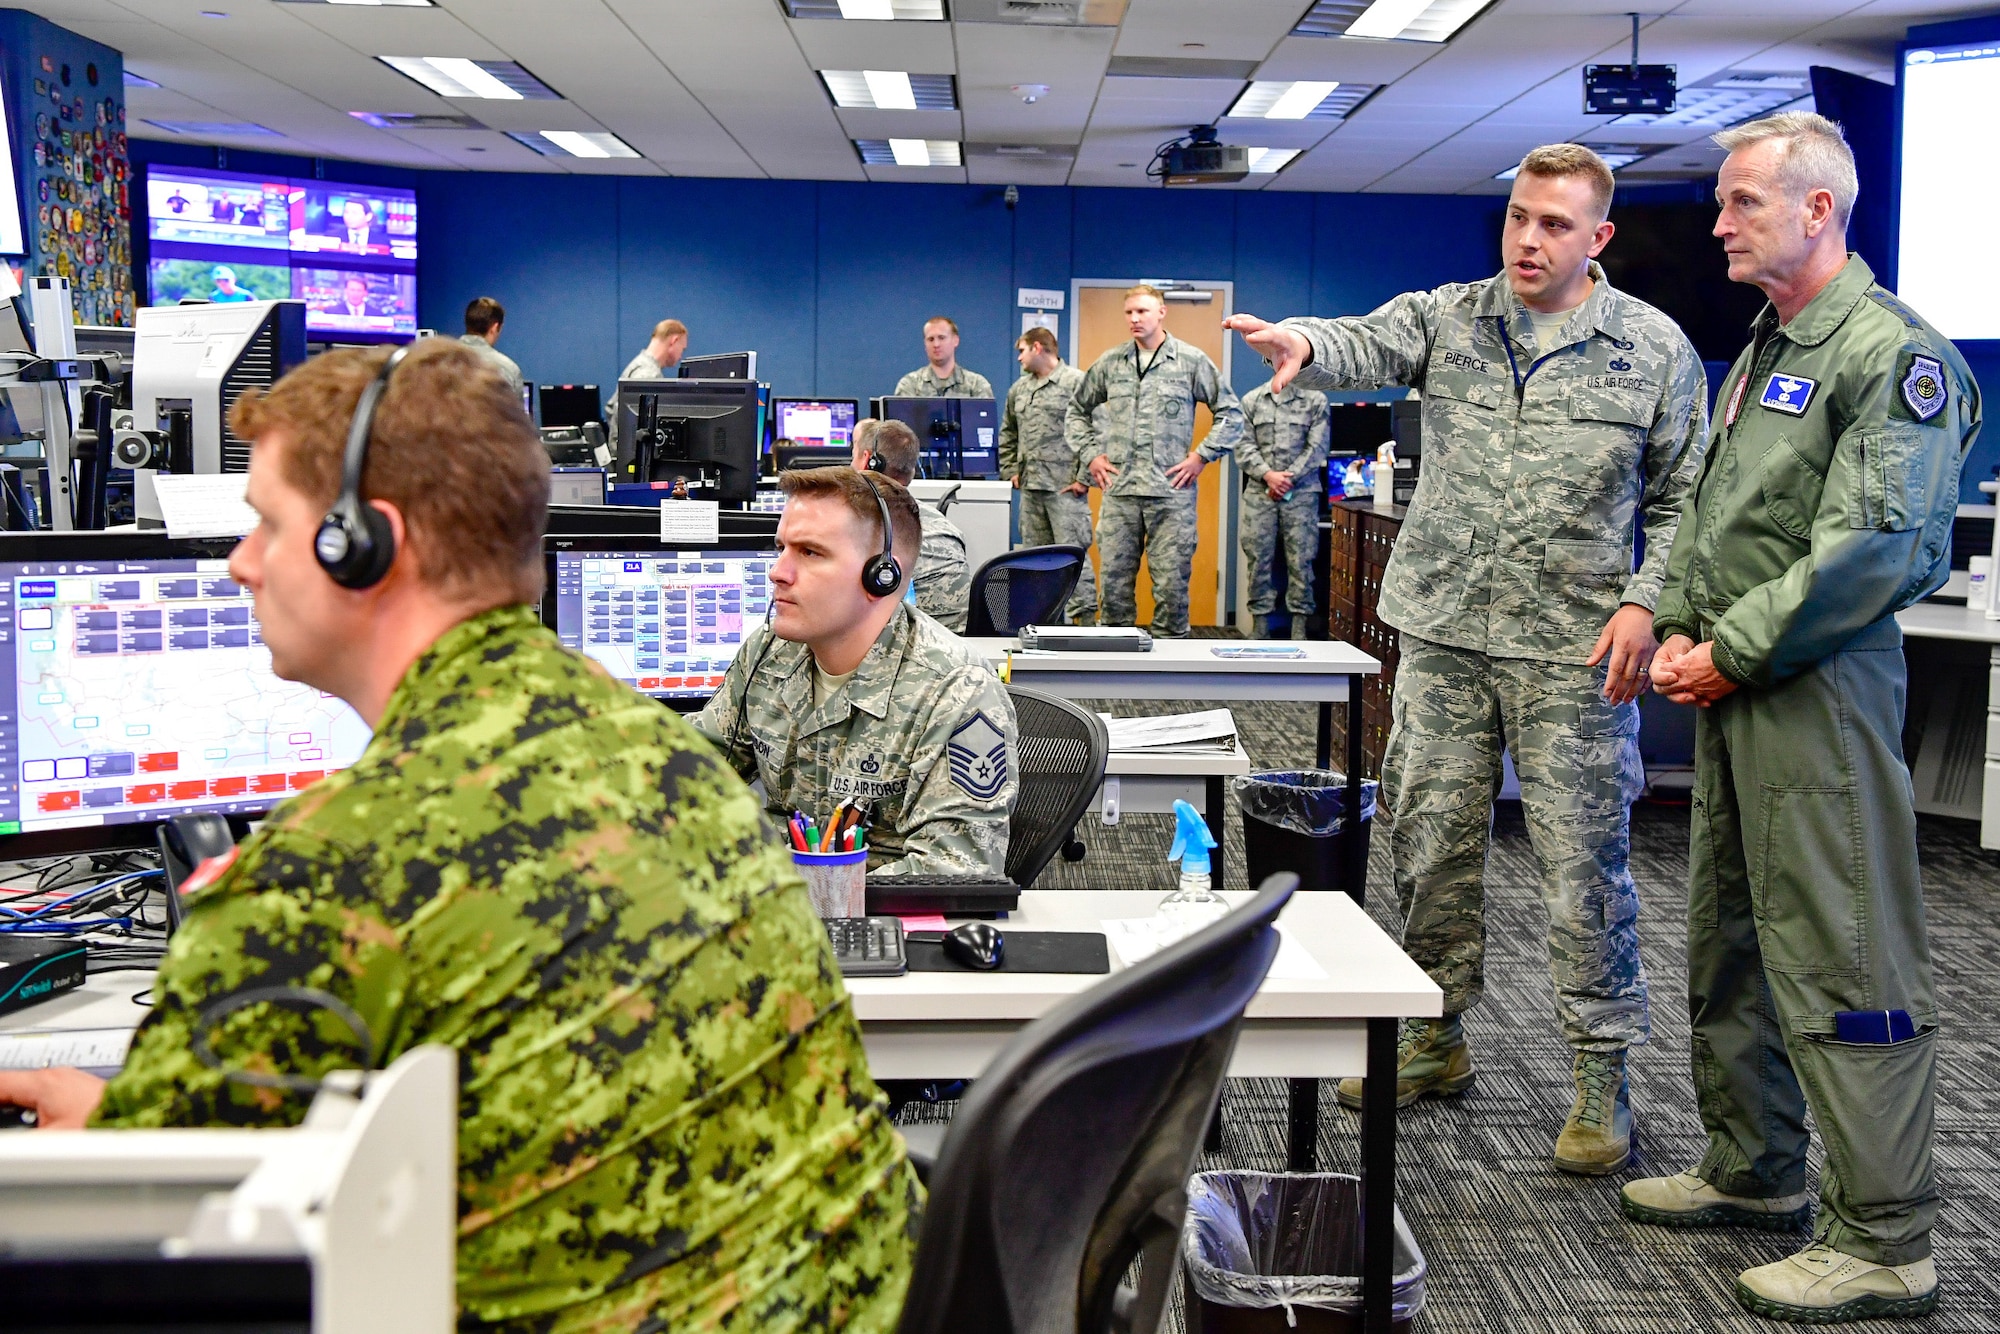 Master Sgt. Donald Pierce, 225th Air Defense Squadron air surveillance technician, answers Gen. Terrence O'Shaughnessy, NORAD and USNORTHCOM commander, questions during his visit to the Western Air Defense Sector, Joint Base Lewis-McChord, Washington Aug. 23, 2018.  O'Shaughnessy received a tour of the operations floor and met with the WADS crew that provided command and control of the 142nd Fighter Wing's F-15 intercept of the Aug. 10 stolen Horizon Bombardier Q400 aircraft out of SeaTac International Airport. (U.S. Air National Guard photo by Maj. Kimberly D. Burke)